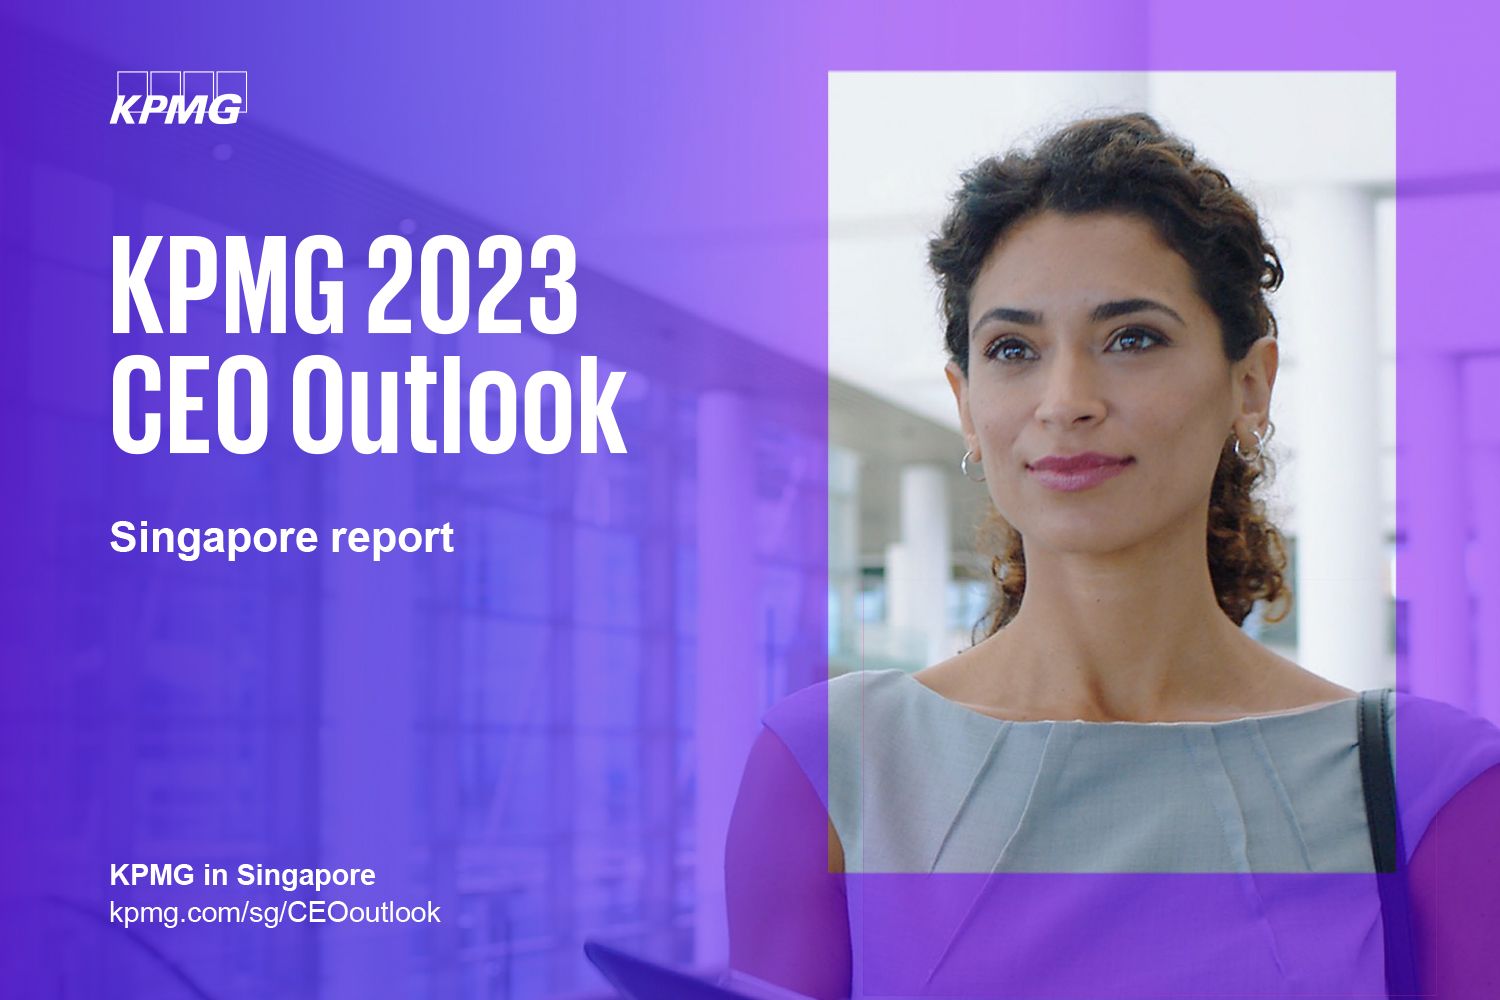 KPMG 2023 CEO Outlook